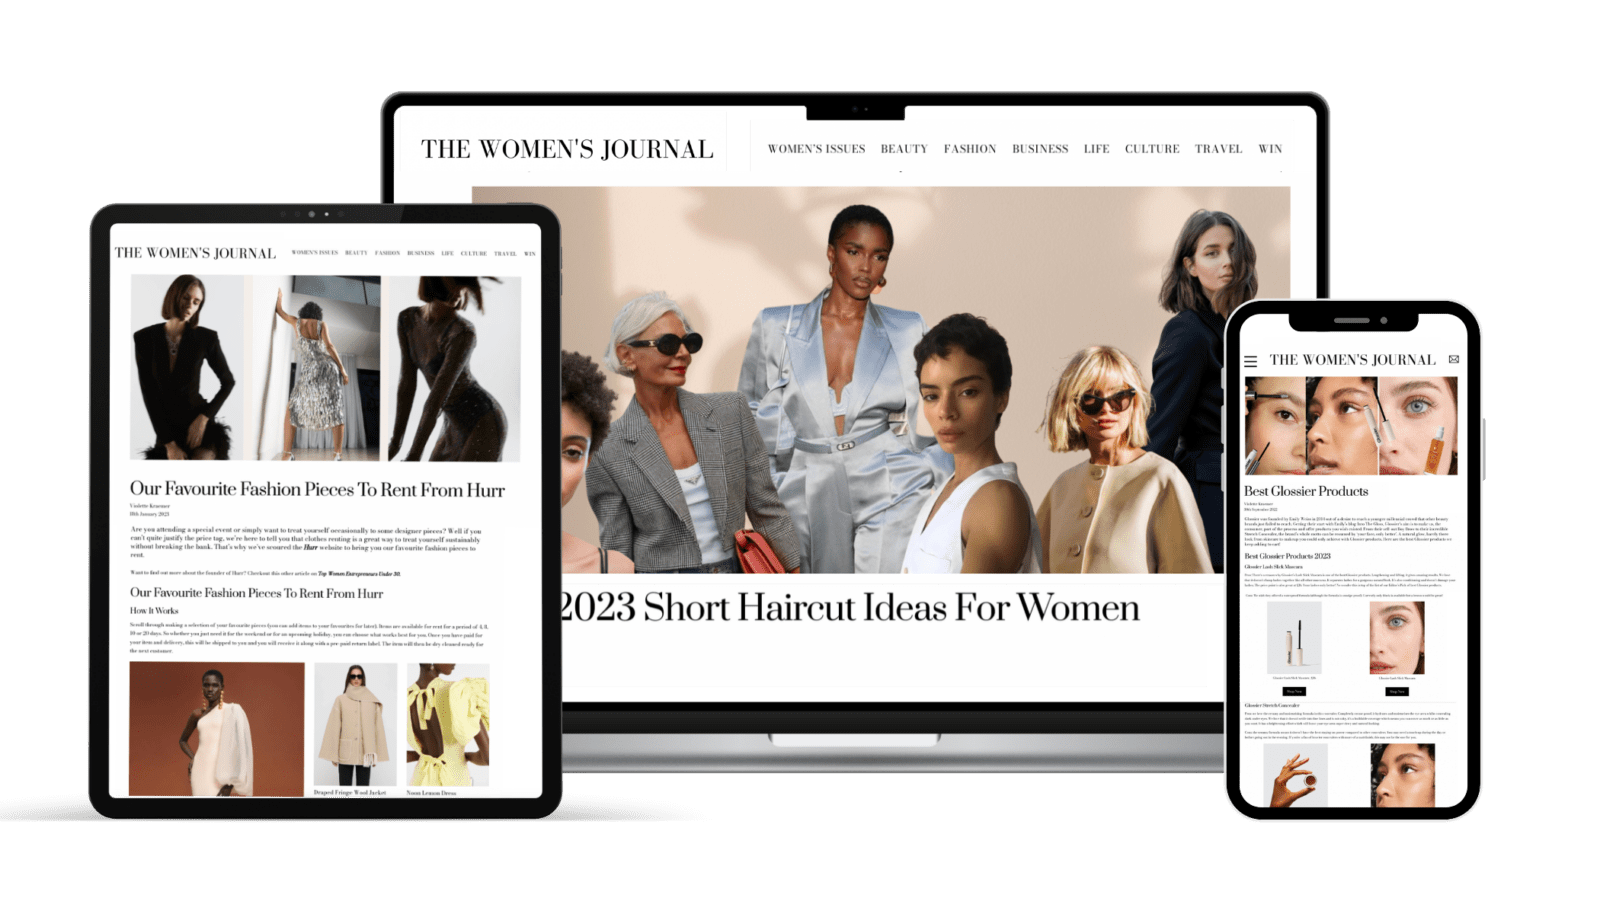 the-womens-journal-advertise